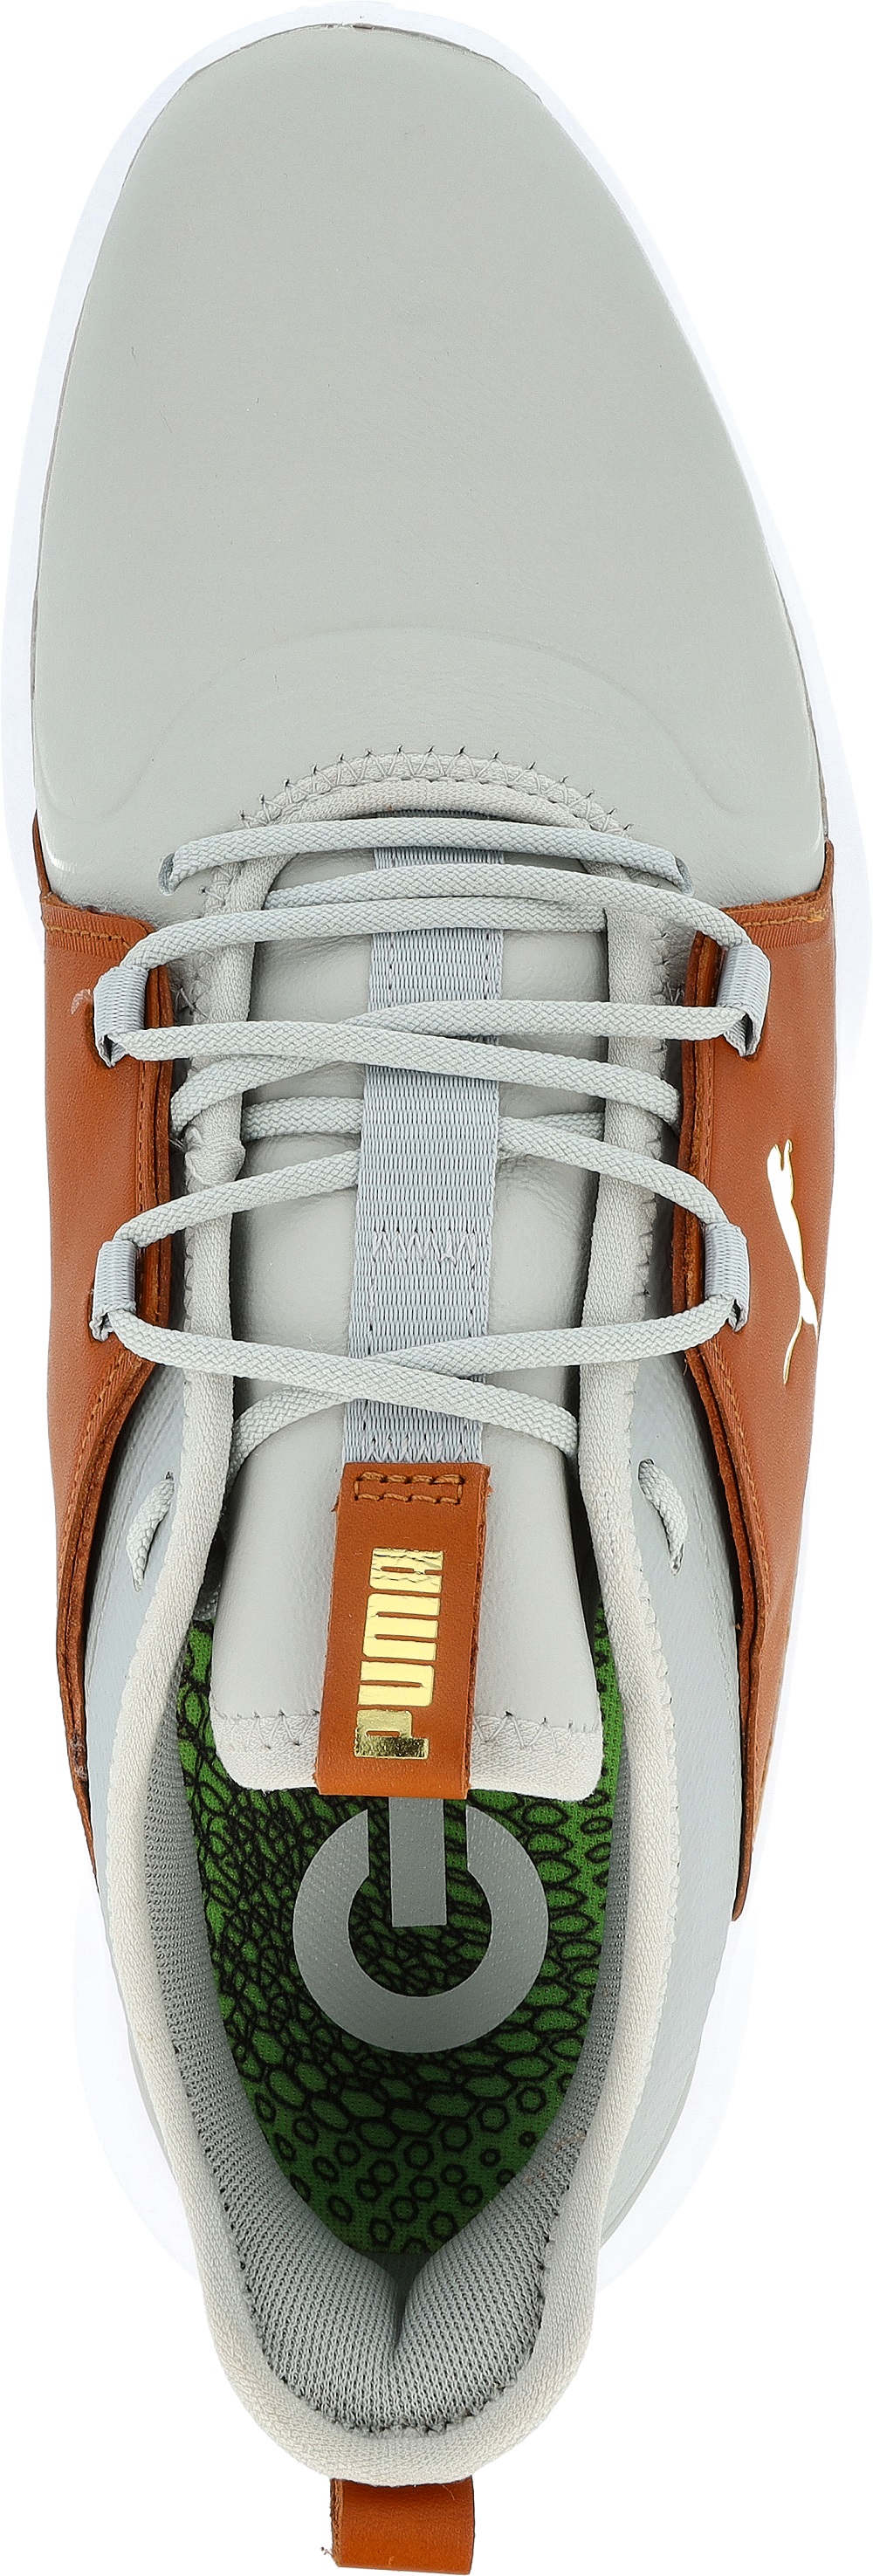 Puma Ignite Fasten8 Crafted Rise/Gold/Brown Men Spikeless Golf Shoes Choose Size - image 5 of 8